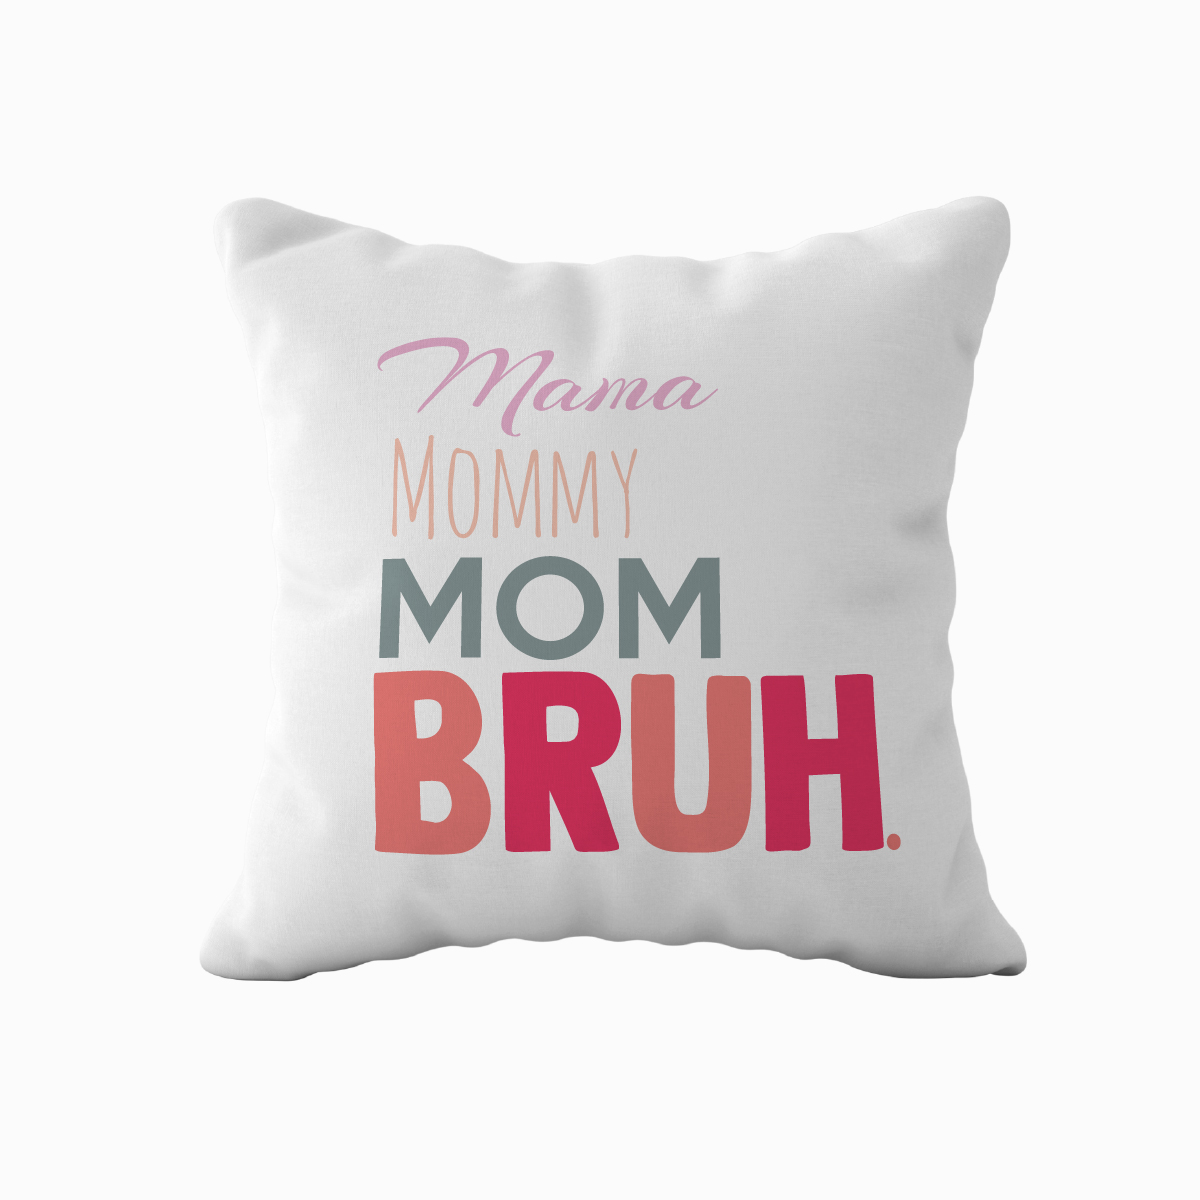 Mama-Mommy-Mom-Bruh funny pillow